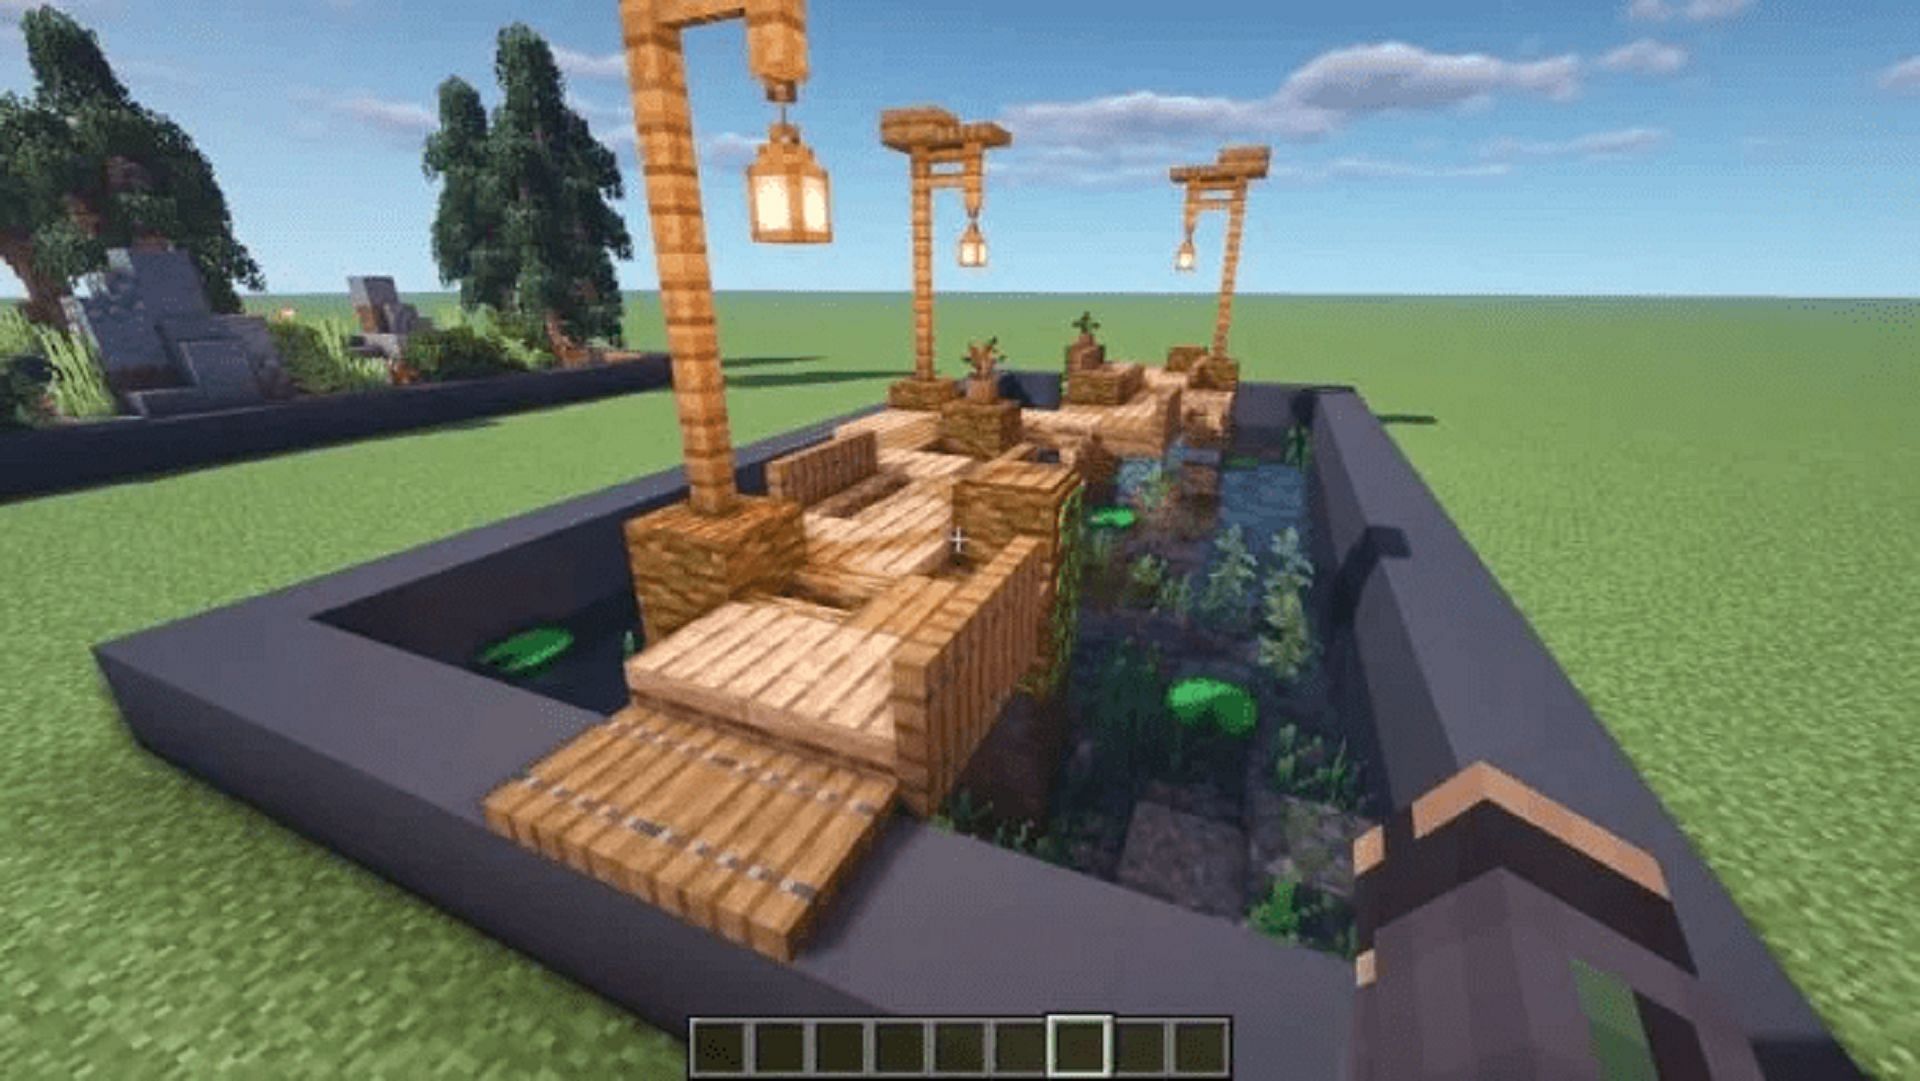 A swamp path perfect for treading through watery locations (Image via TheMythicalSausage/YouTube)